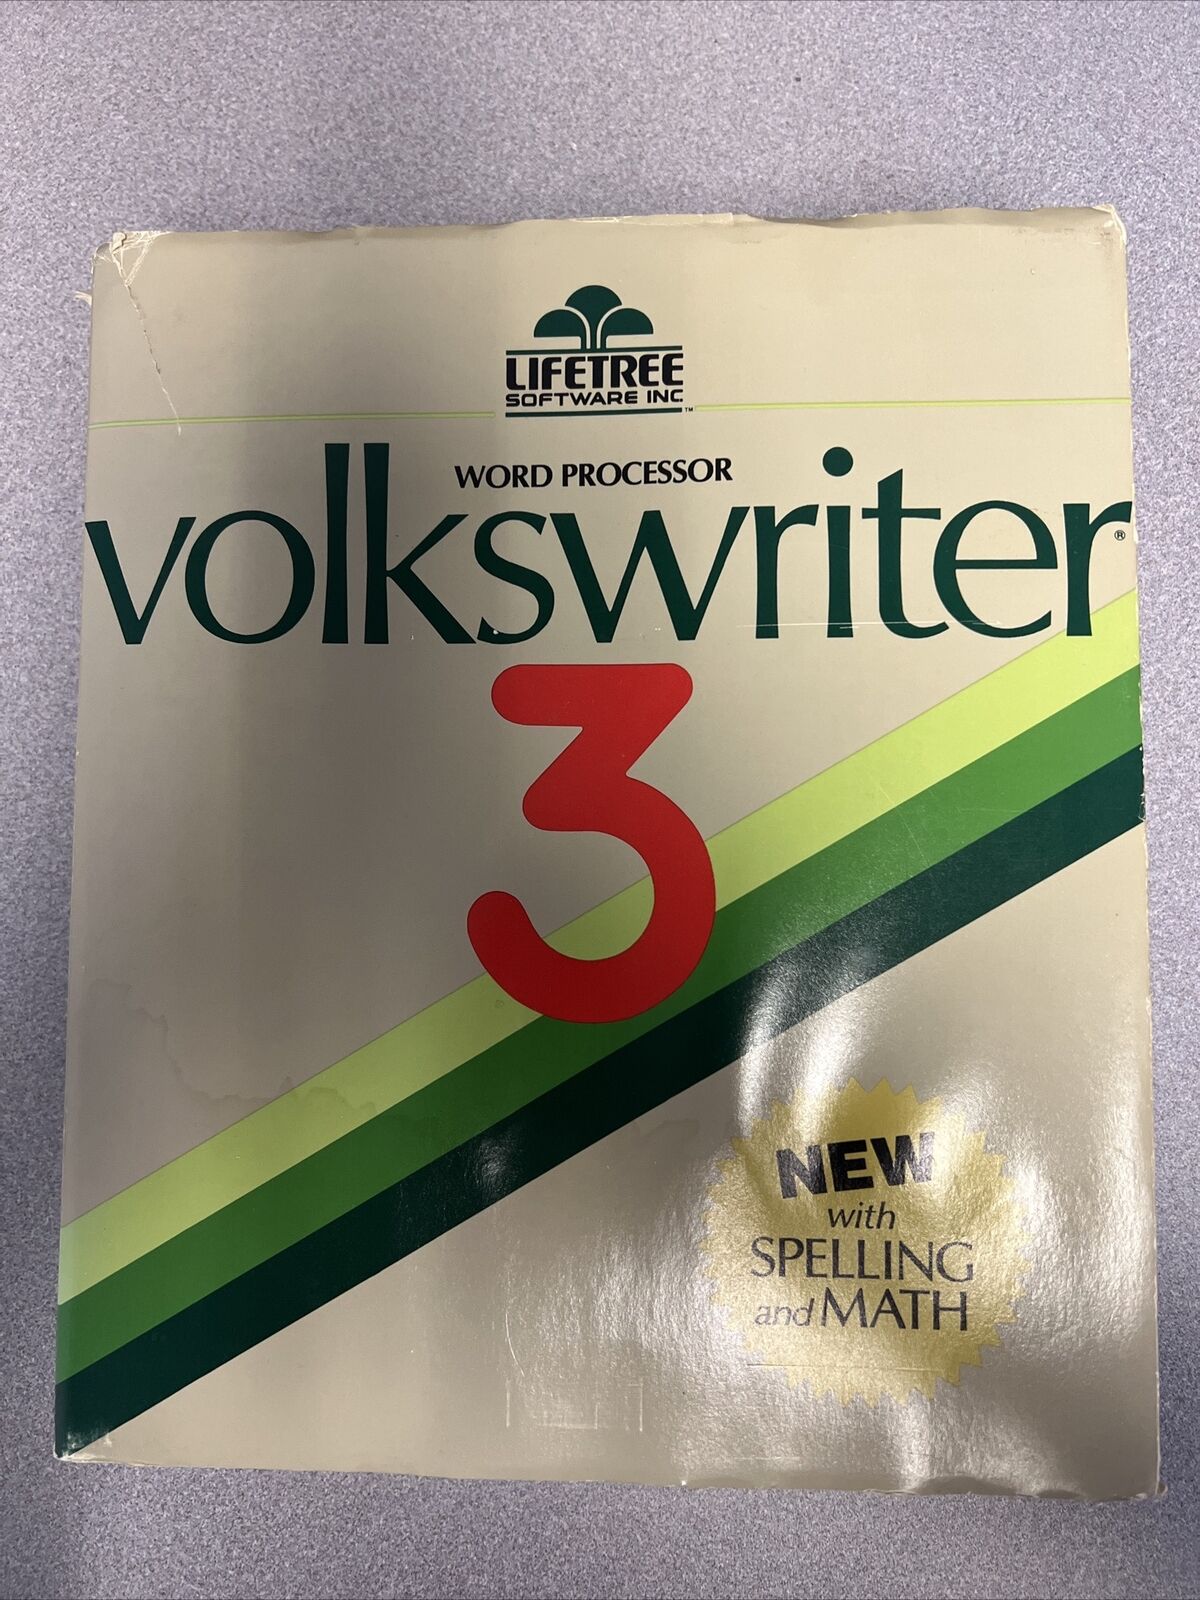 Volkswriter 3 by Lifetree Software 1985. Word processor with Spelling/Math. IBM